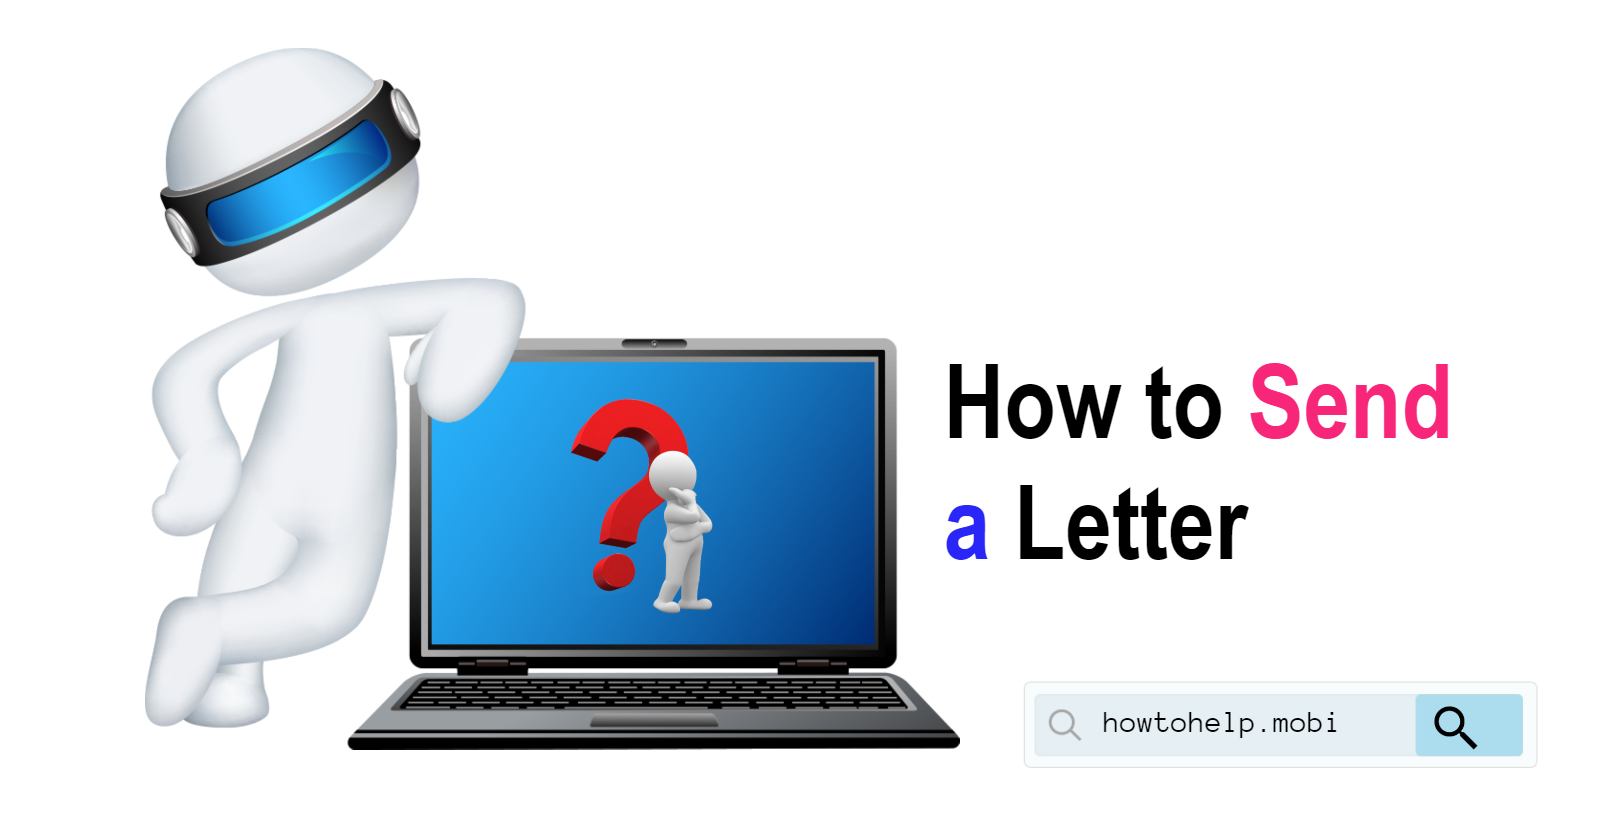 How to Send a Letter